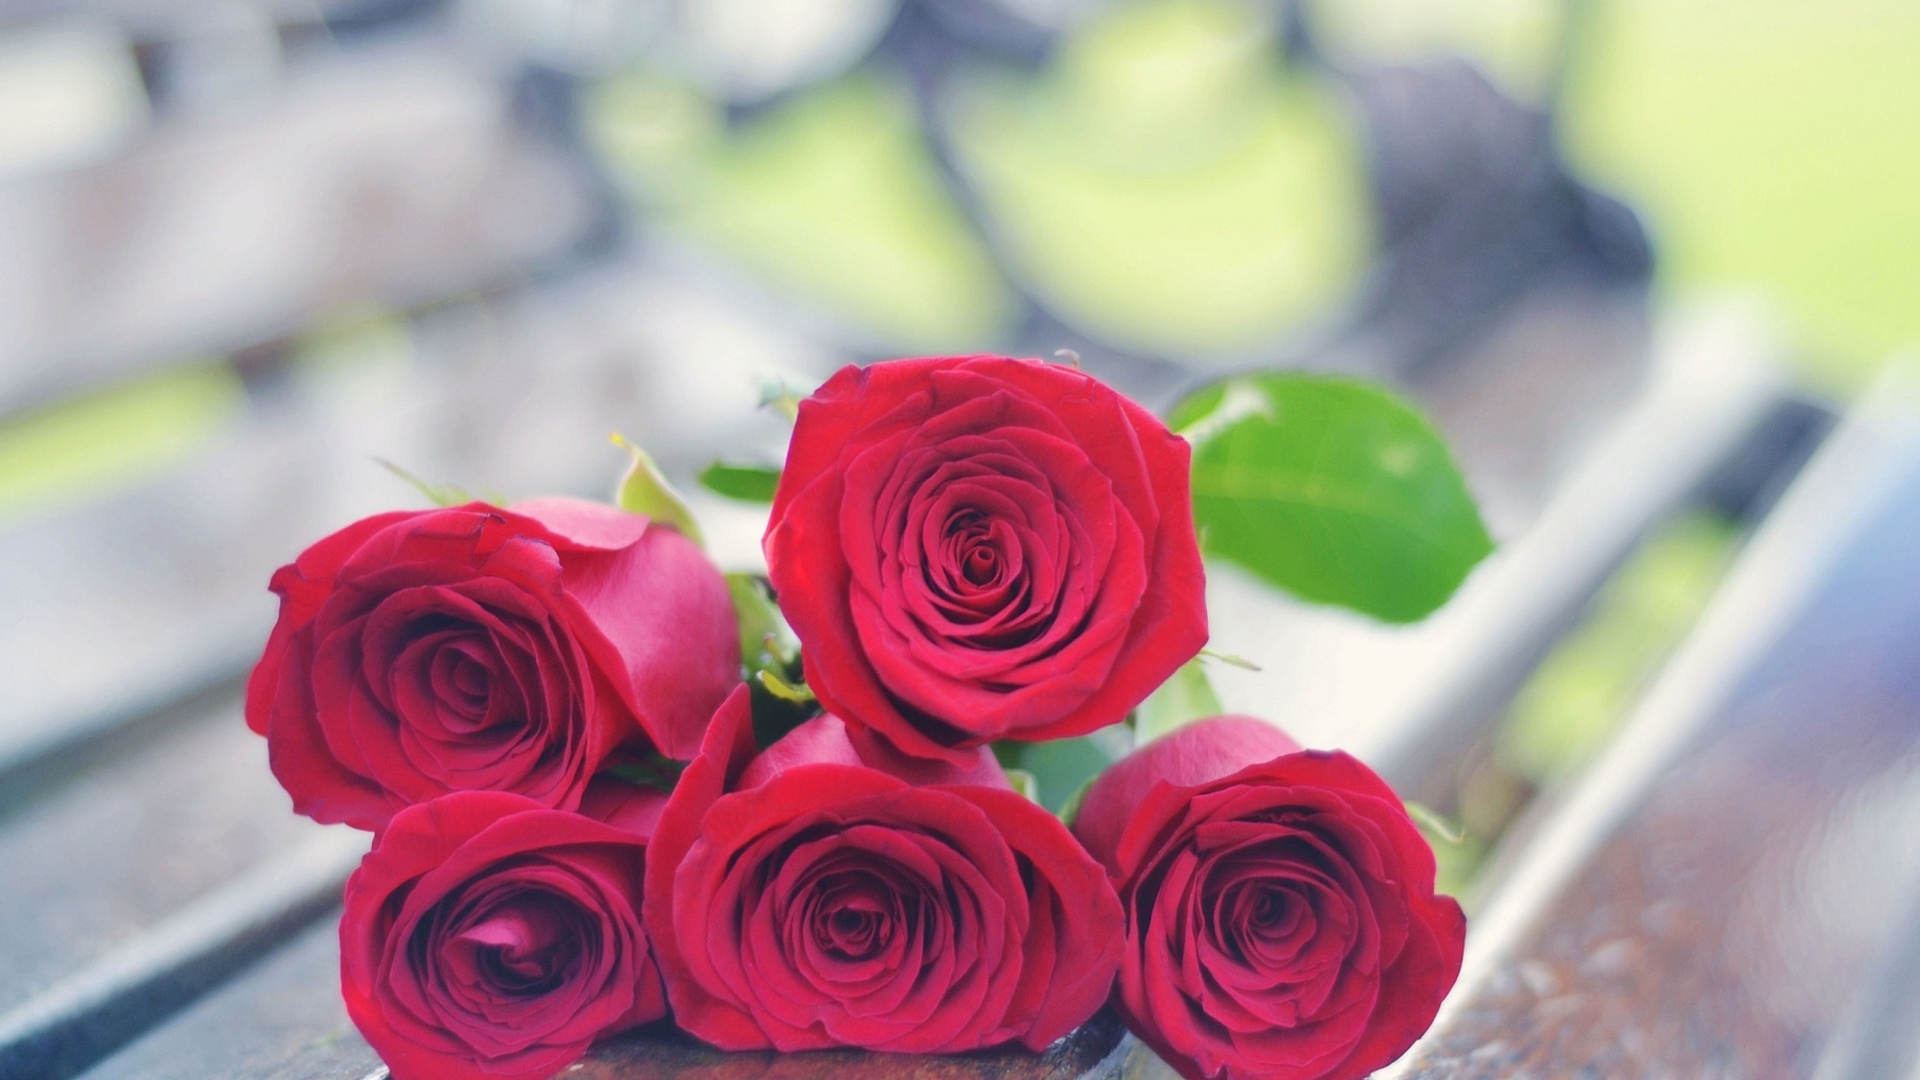 Red Roses Bouquet On Bench screenshot #1 1920x1080